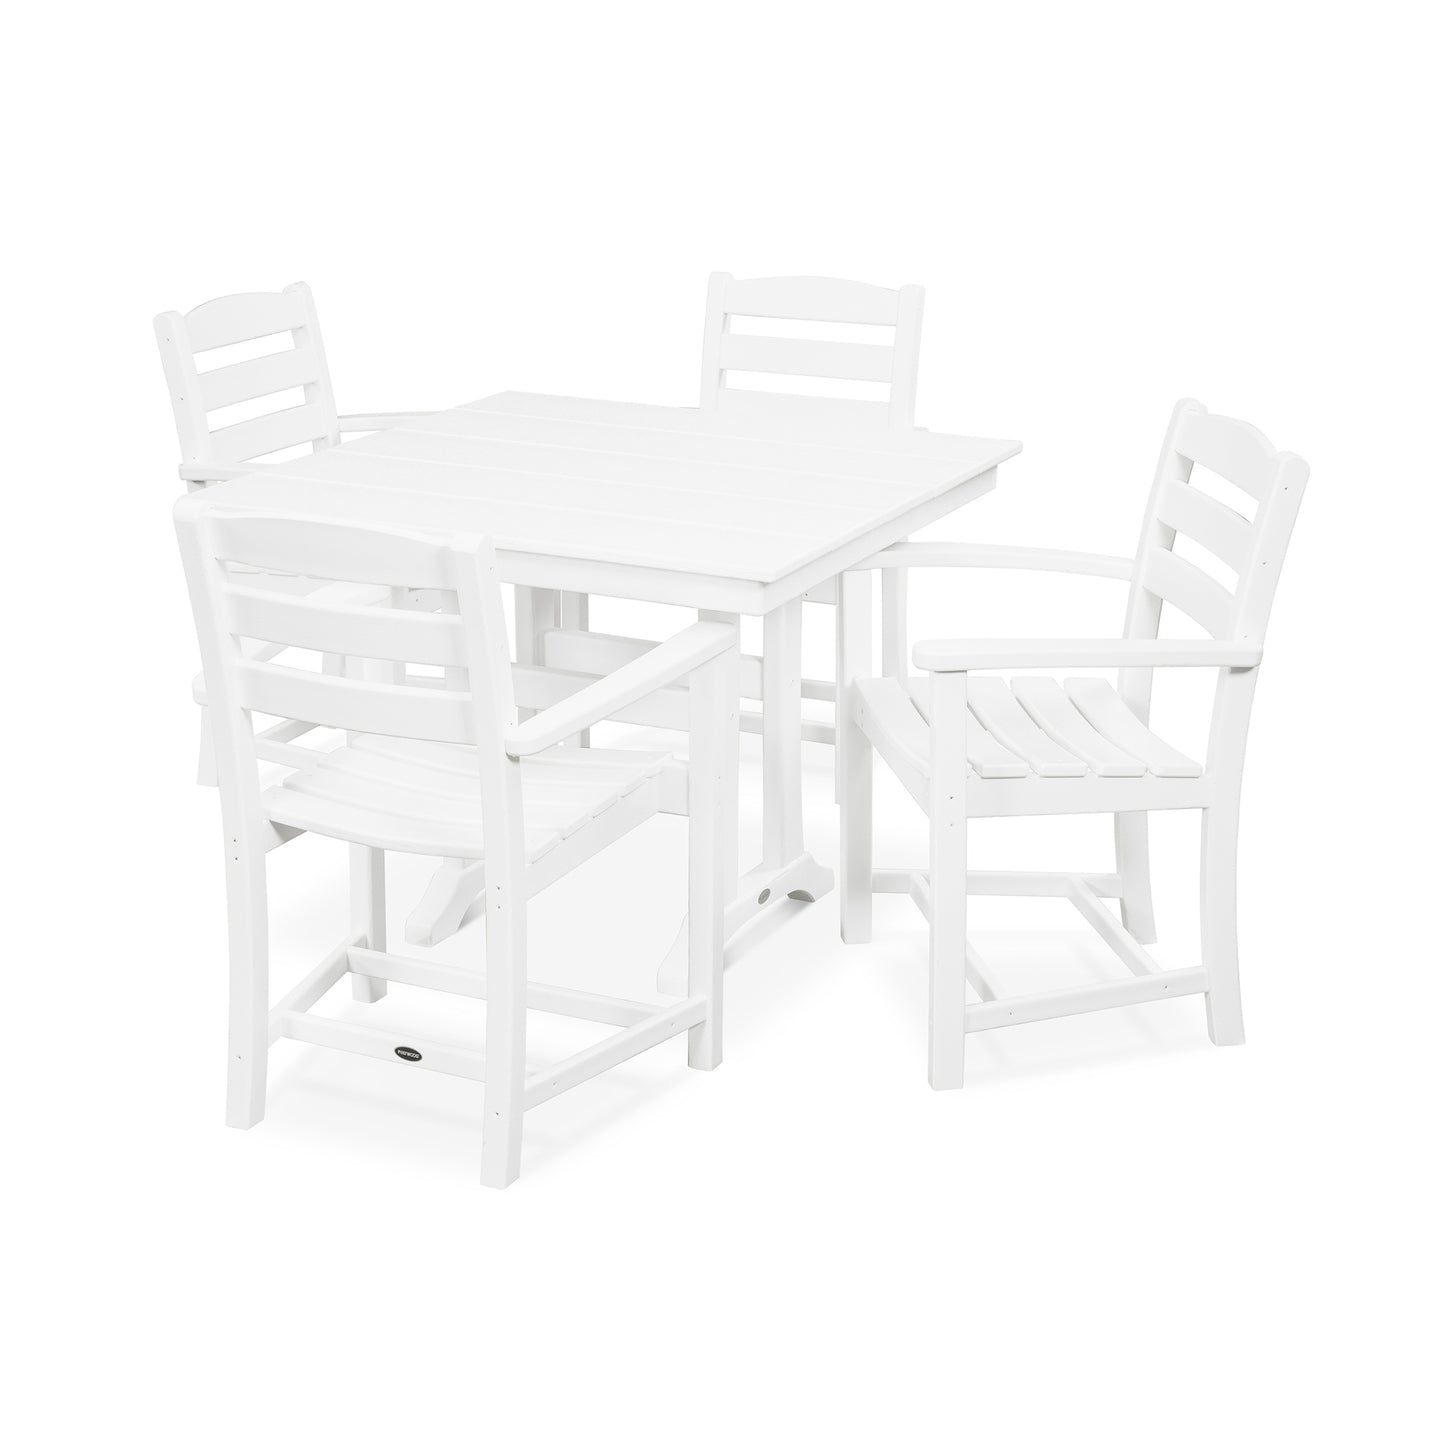 A white POLYWOOD La Casa Cafe 5-Piece Farmhouse Trestle Arm Chair Dining Set consisting of a square table and four chairs with slatted backs, isolated on a white background.